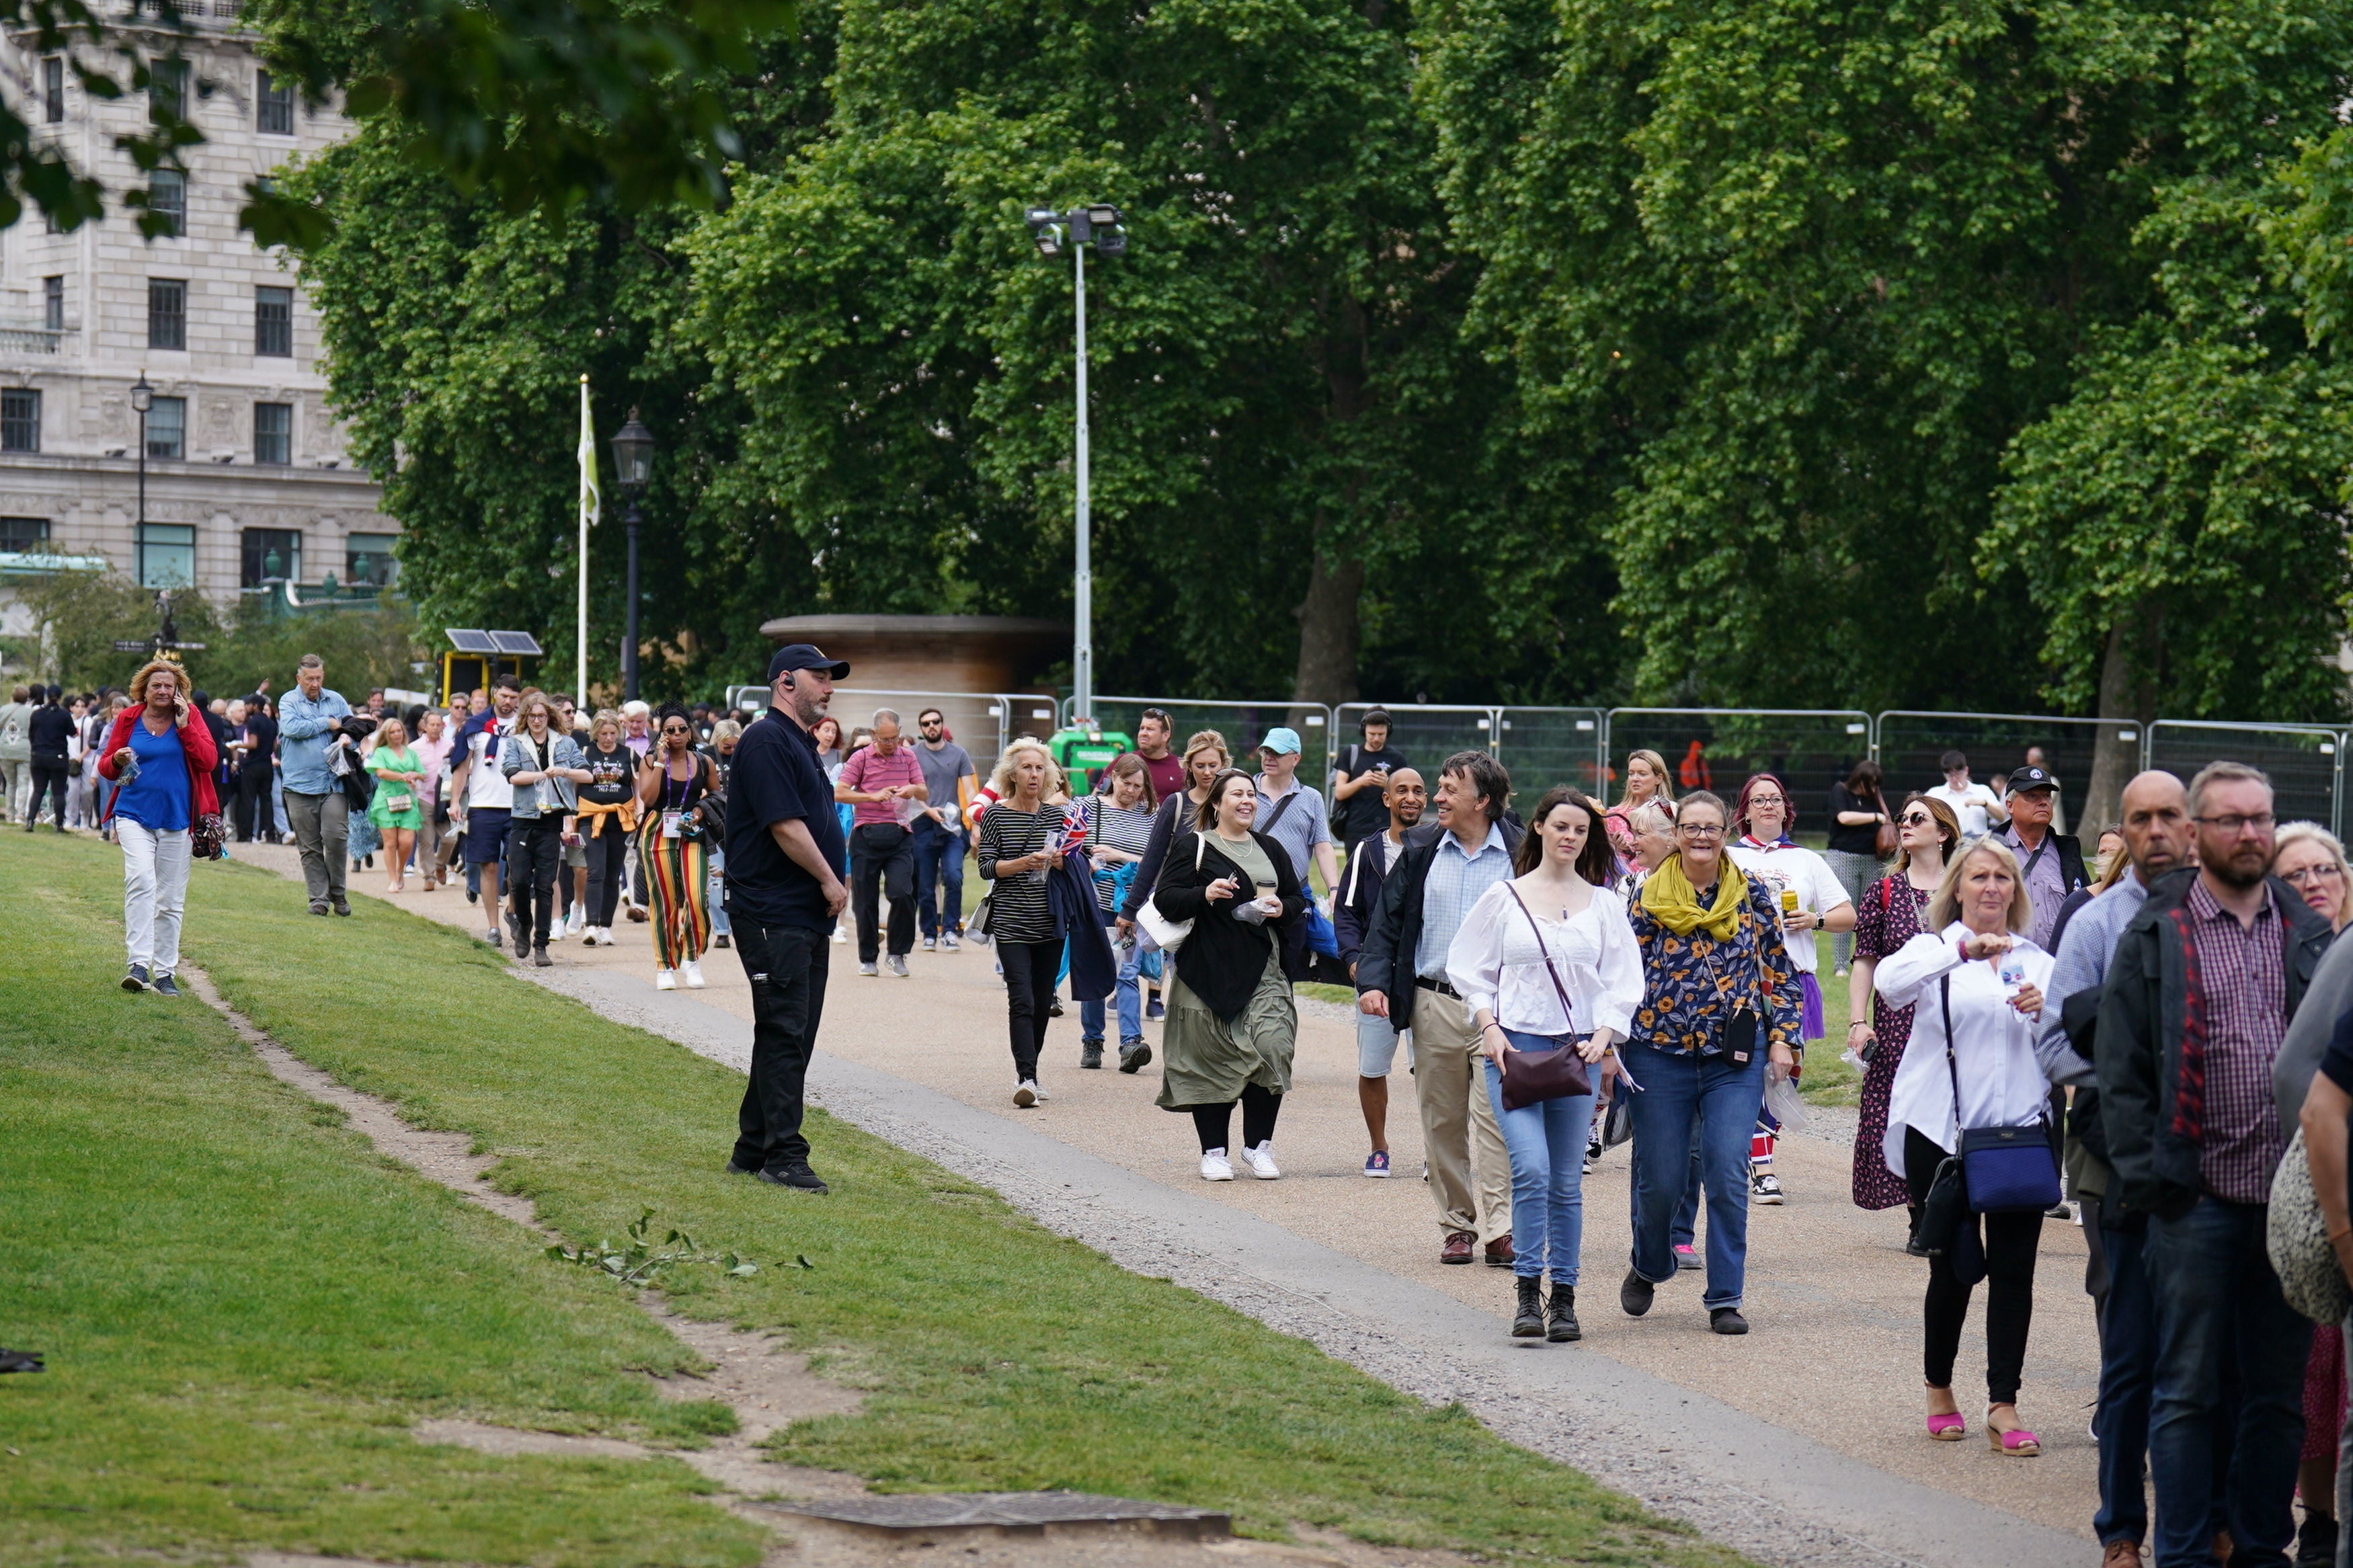 Ticket holders enter Green Park before the start of the Platinum Party at the Palace in front of Buckingham Palace